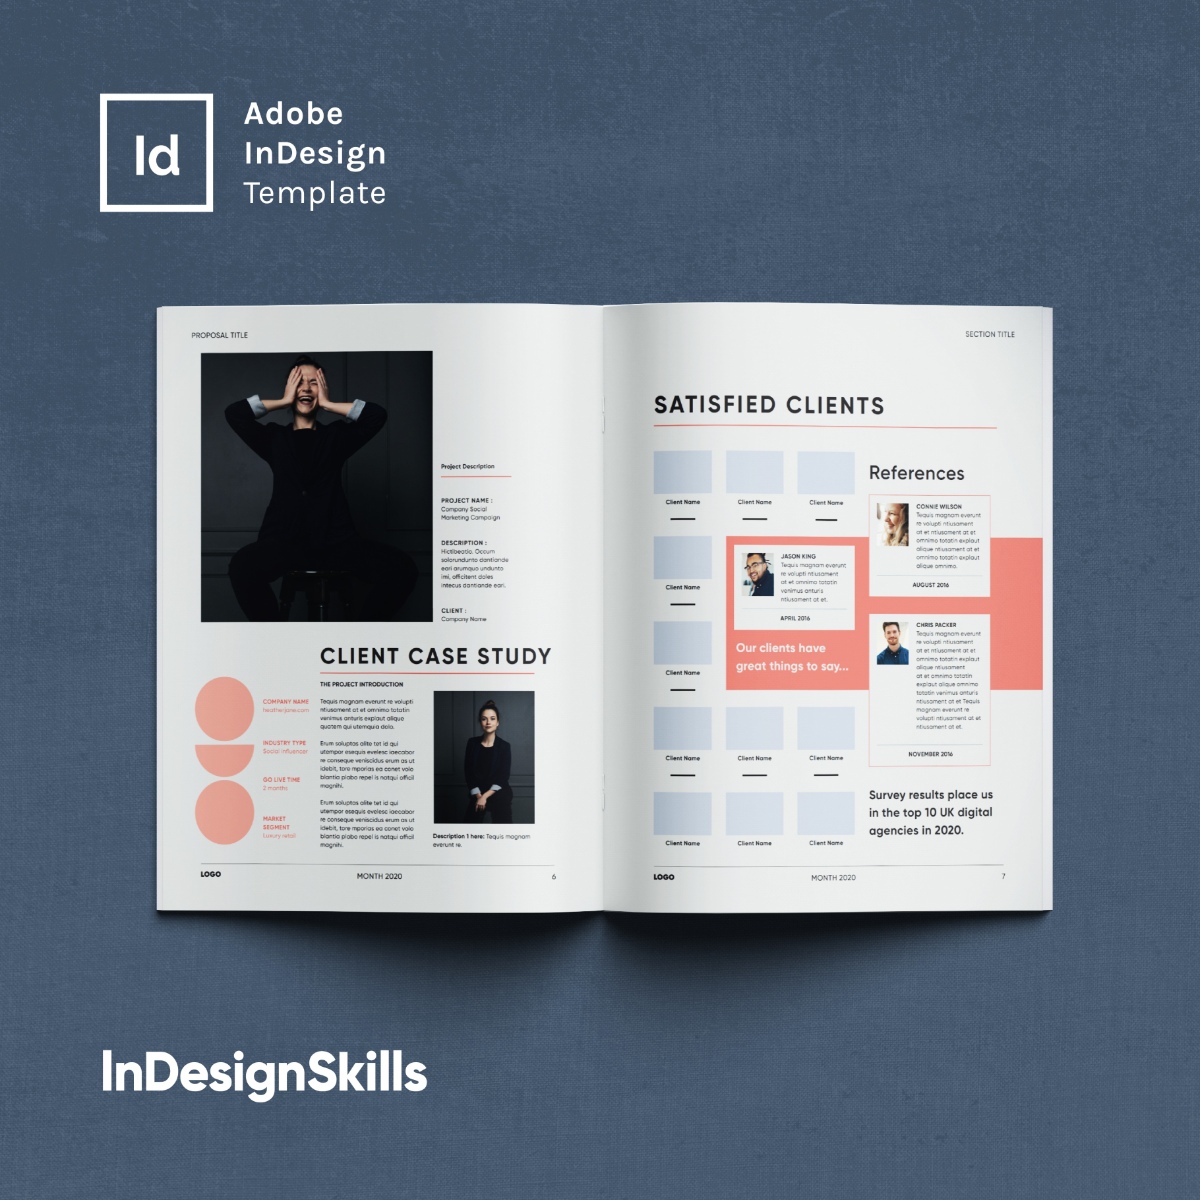 proposal template adobe indesign download proposal template indesign proposal indesign report template indesign client case indesign client case study free download